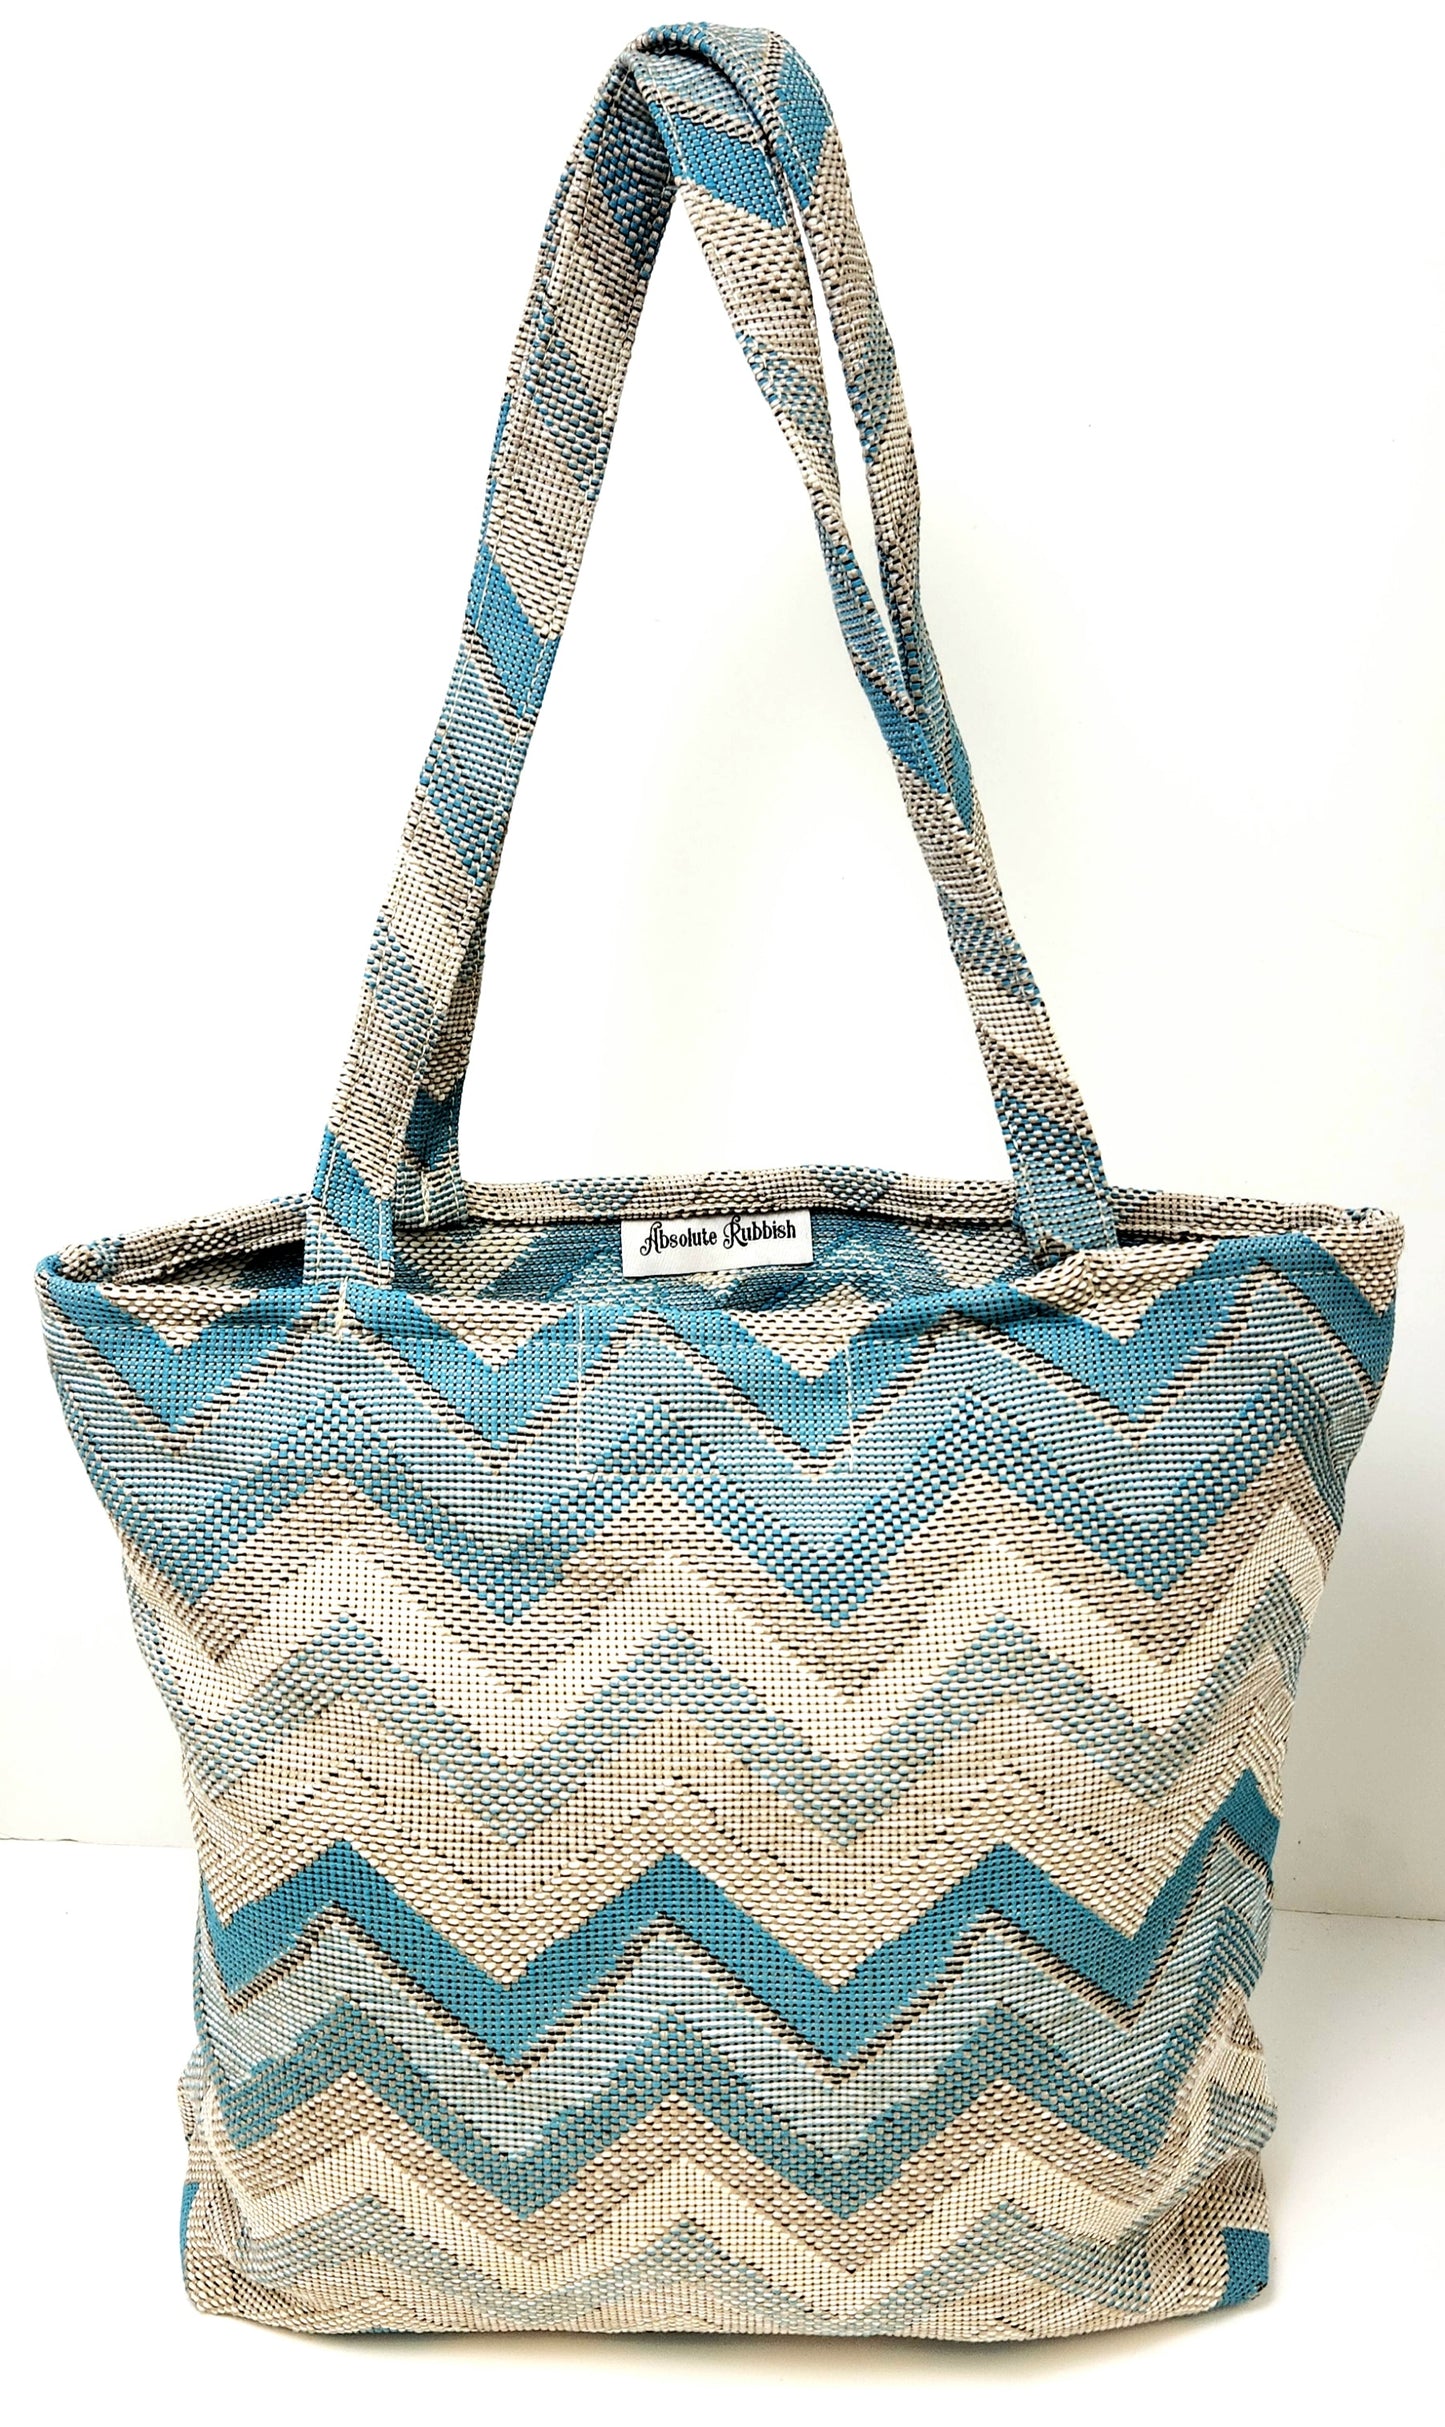 Open tote (upholstery)